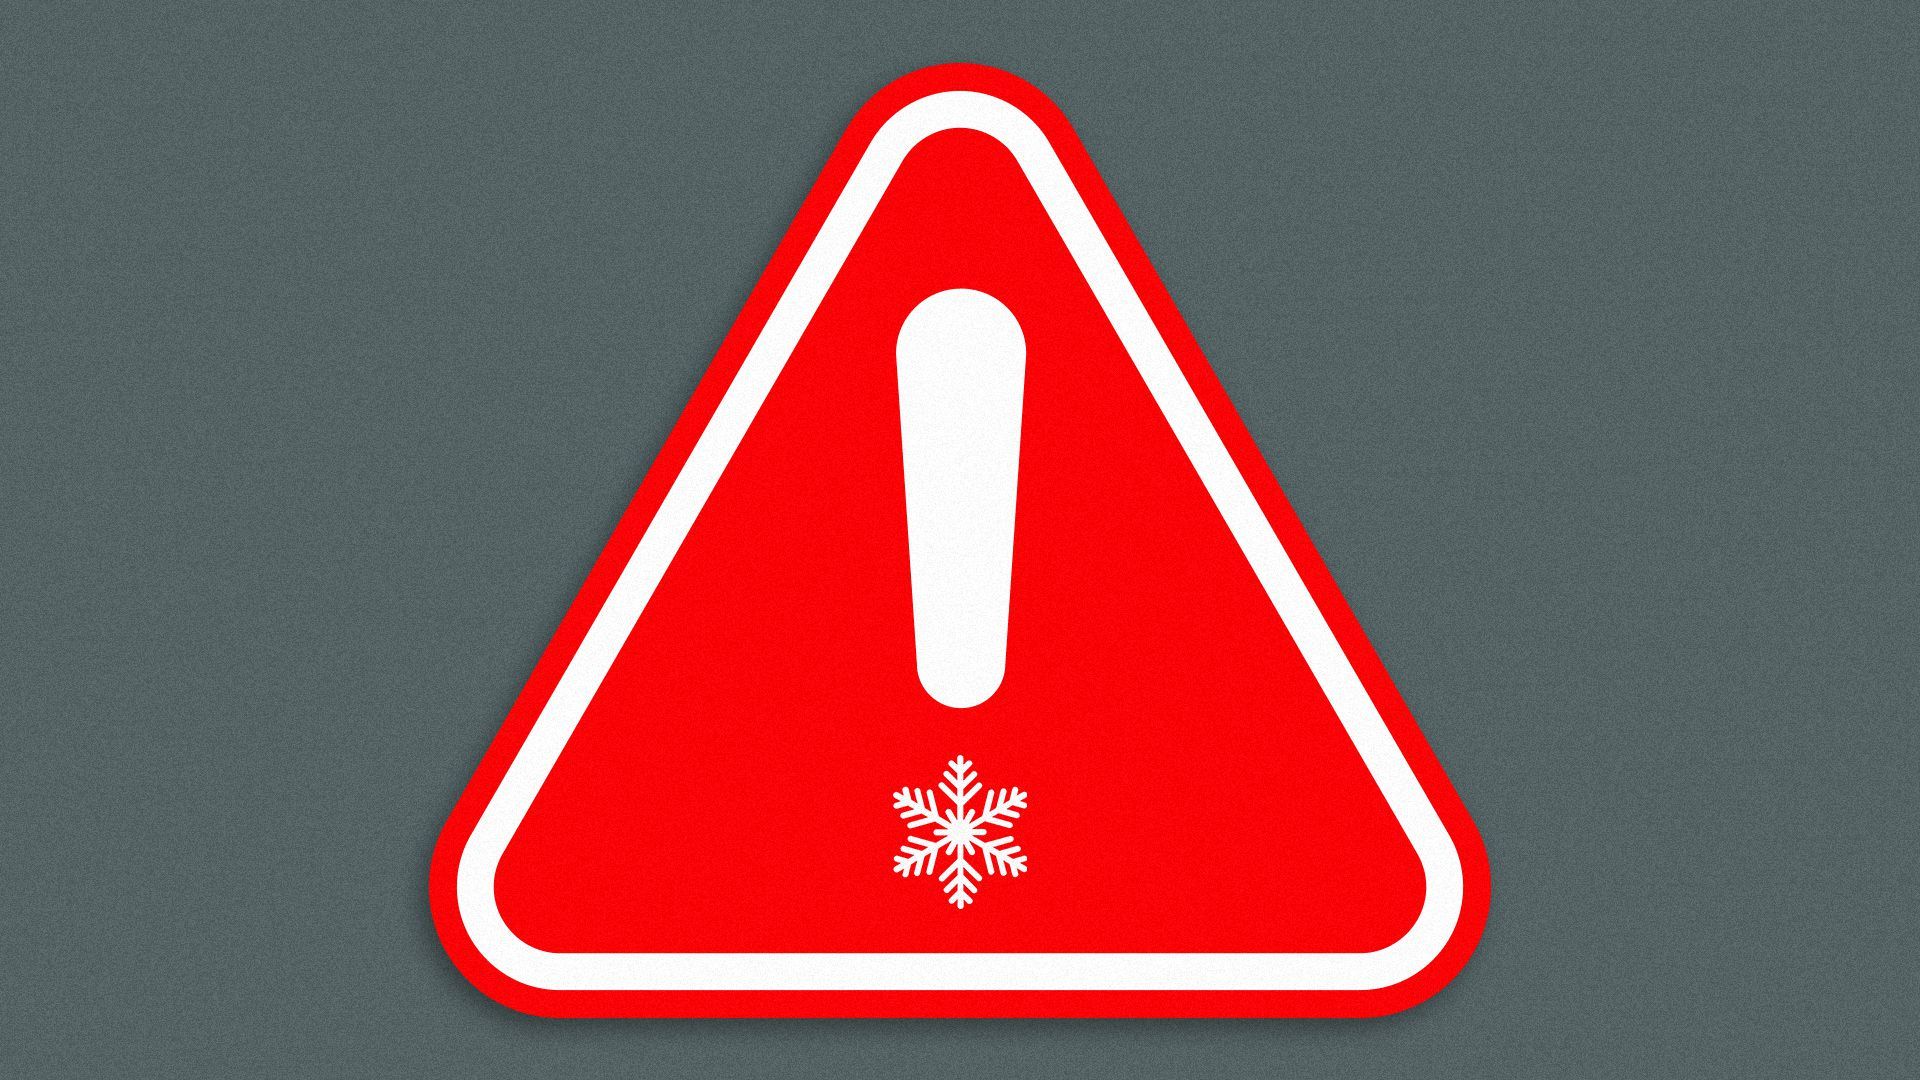 Illustration of a caution sign with a snowflake instead of a circle in the exclamation point.